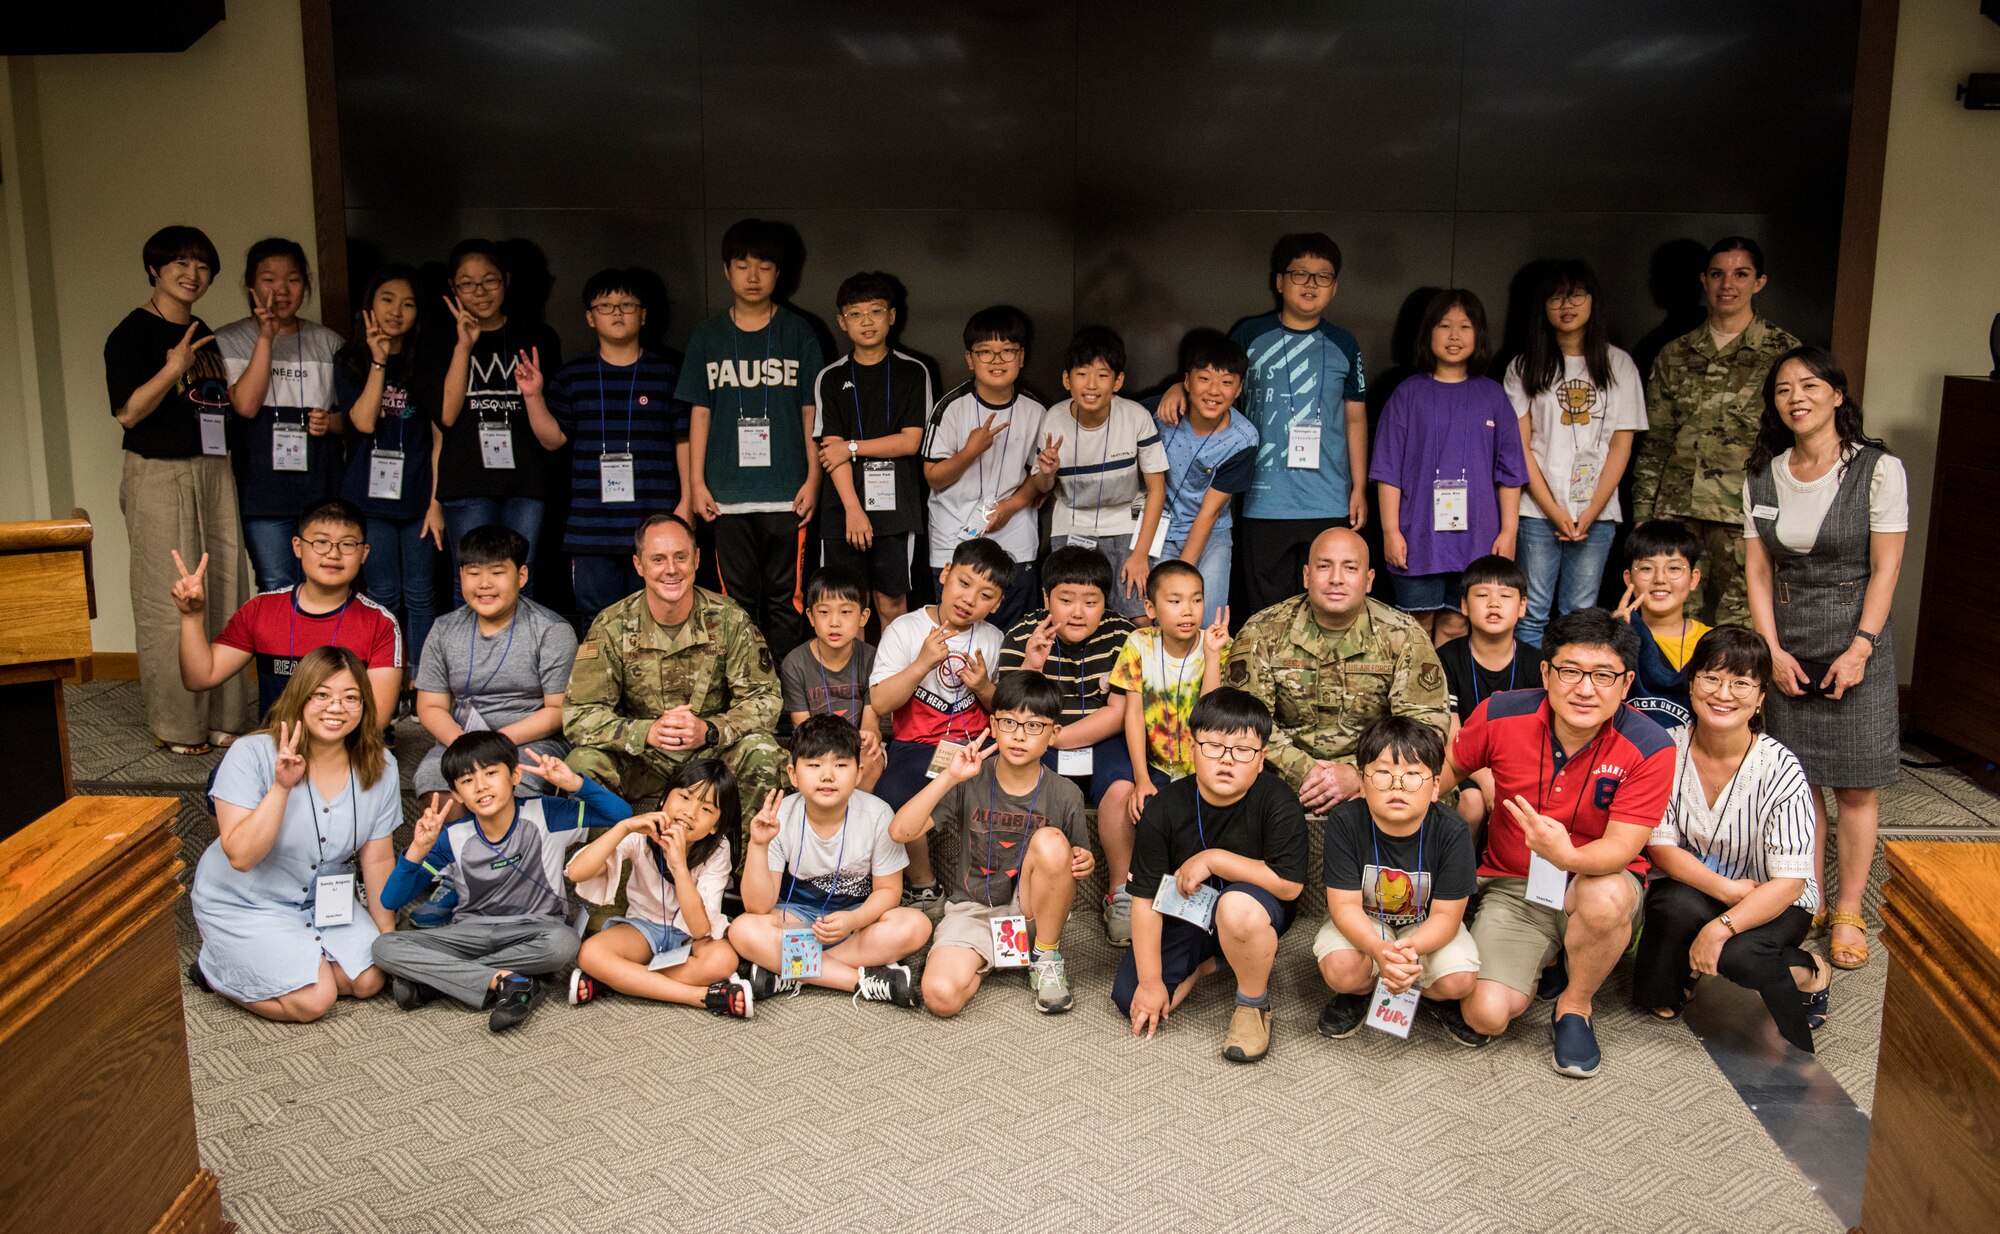 Korean children from the local area take a photo with 8th Fighter Wing leadership during a tour at Kunsan Air Base, Republic of Korea, Aug. 2, 2019. During their visit, the kids had a chance to get hands-on with some firefighting equipment and see one of the fire trucks use its water cannon. (U.S. Air Force photo by Senior Airman Stefan Alvarez)